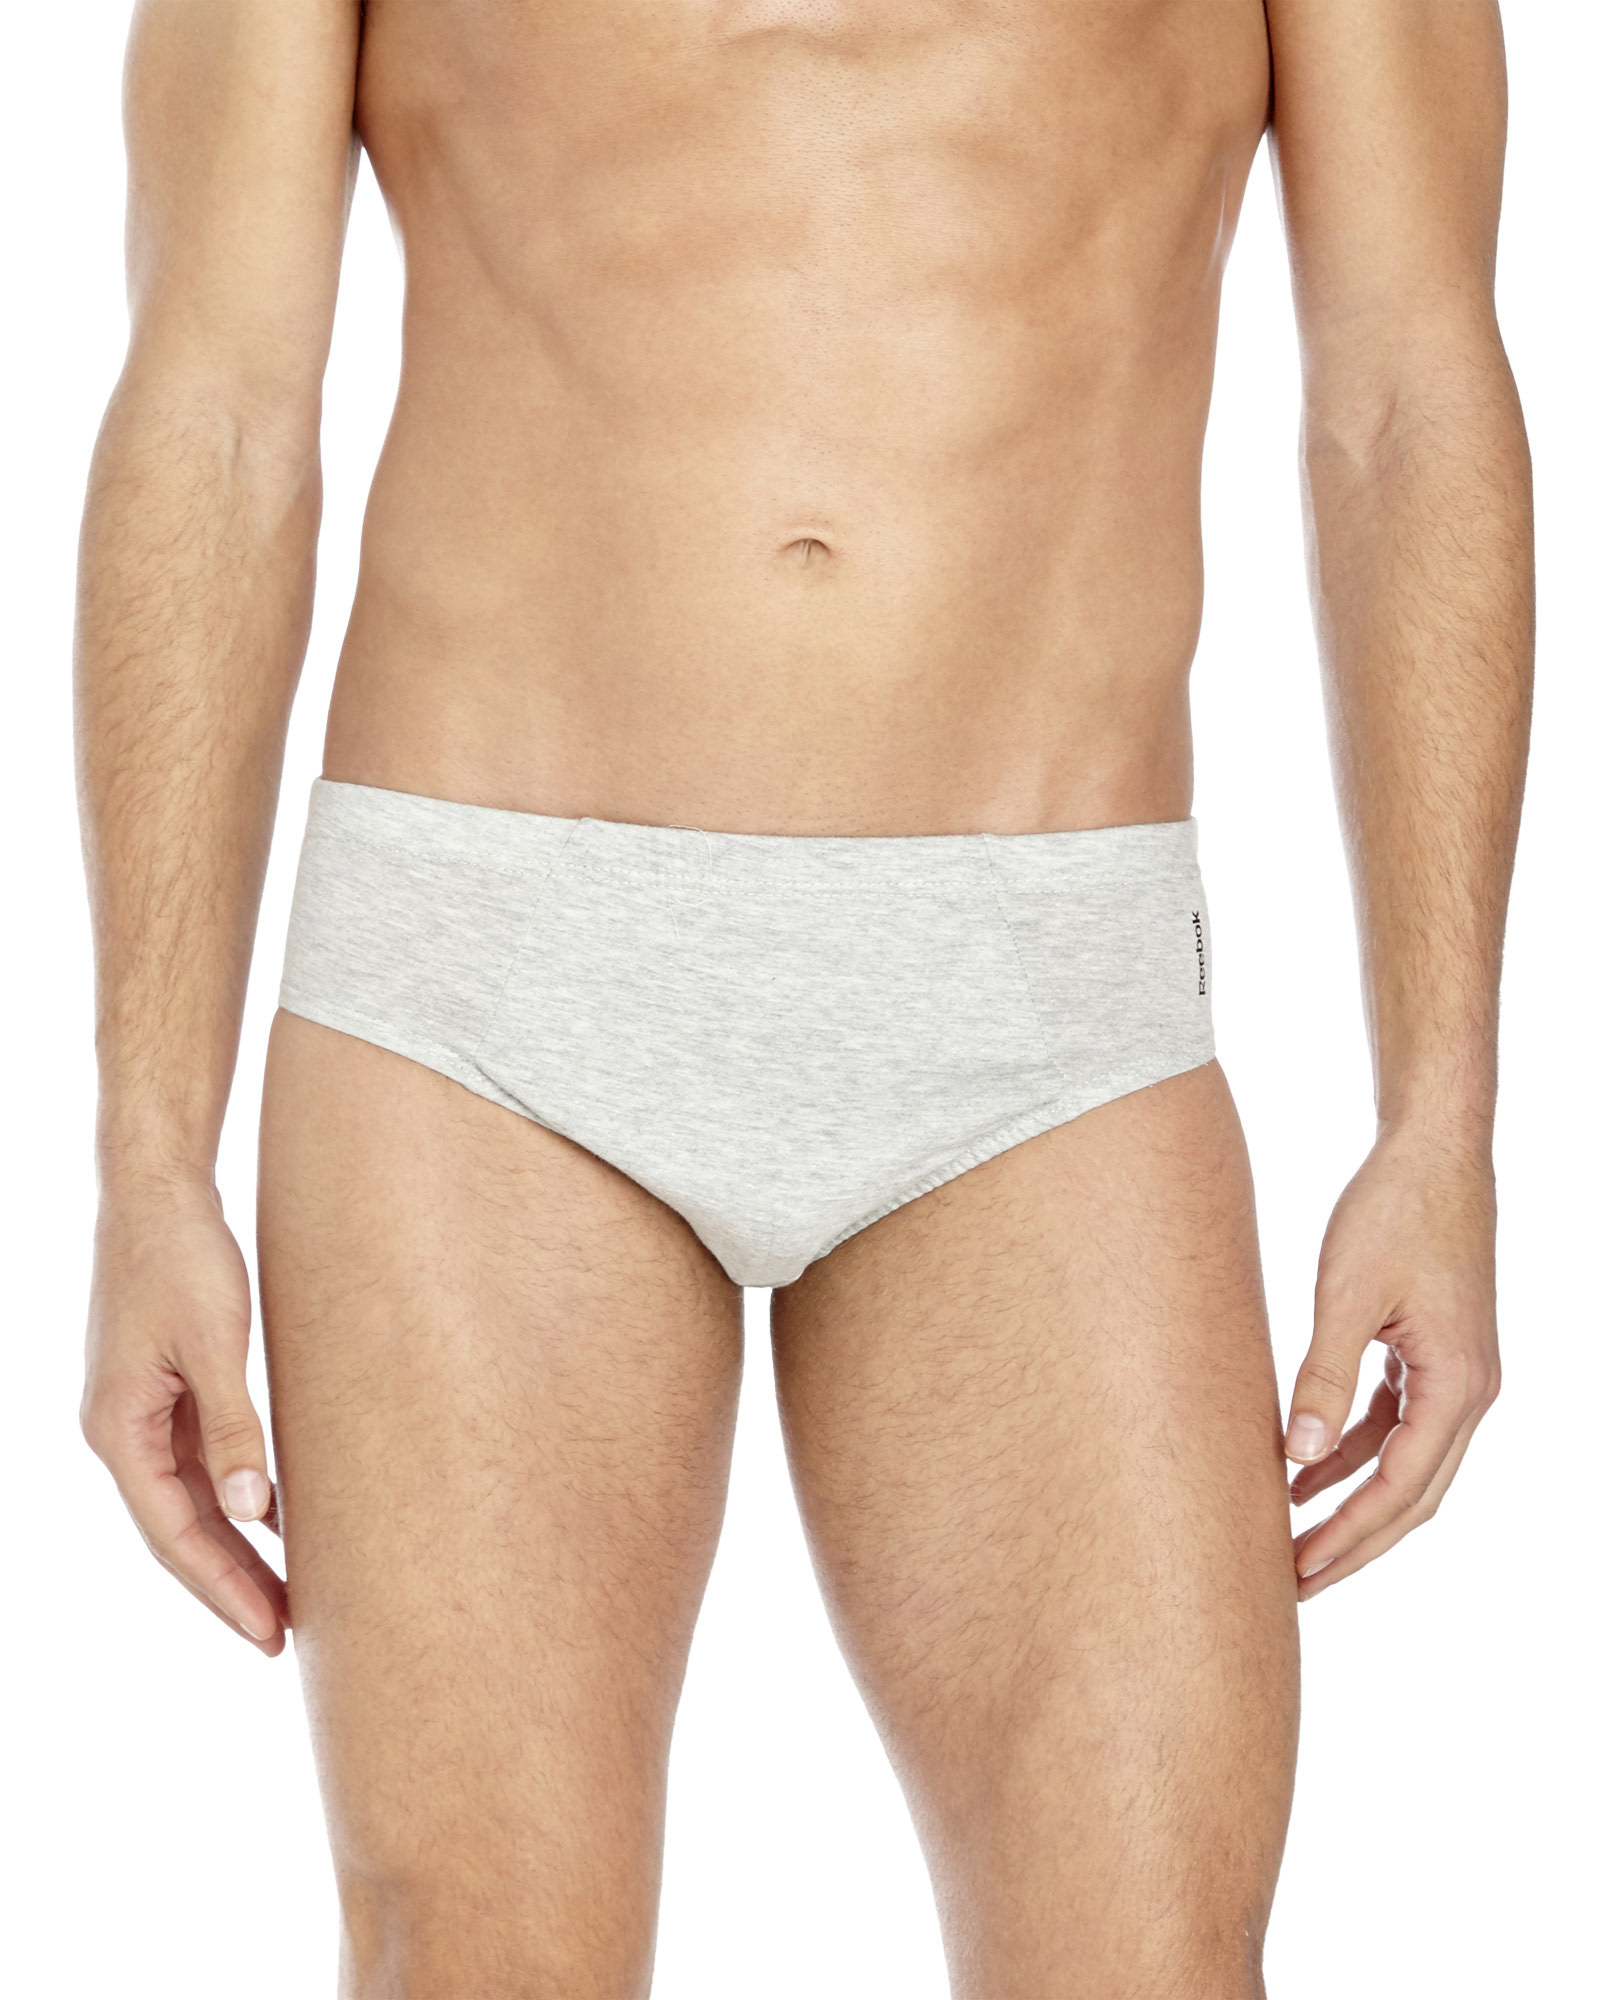 Lyst Reebok 5 Pack Low Rise Briefs In Gray For Men 8996